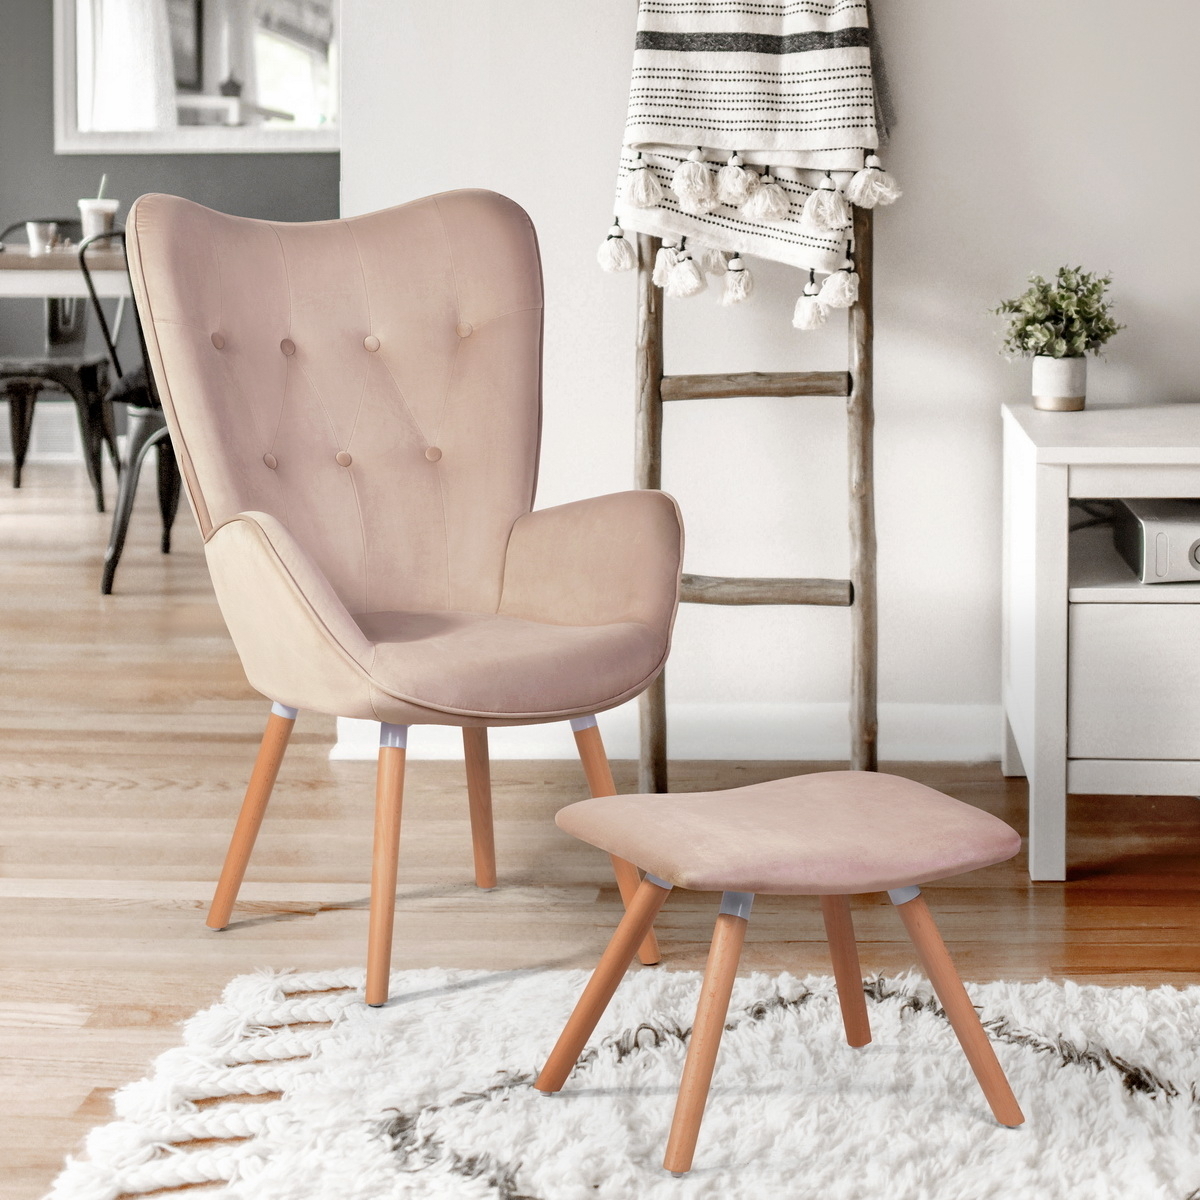 26.6 Inch Wide Tufted Balloon Chair and Ottoman In Blush